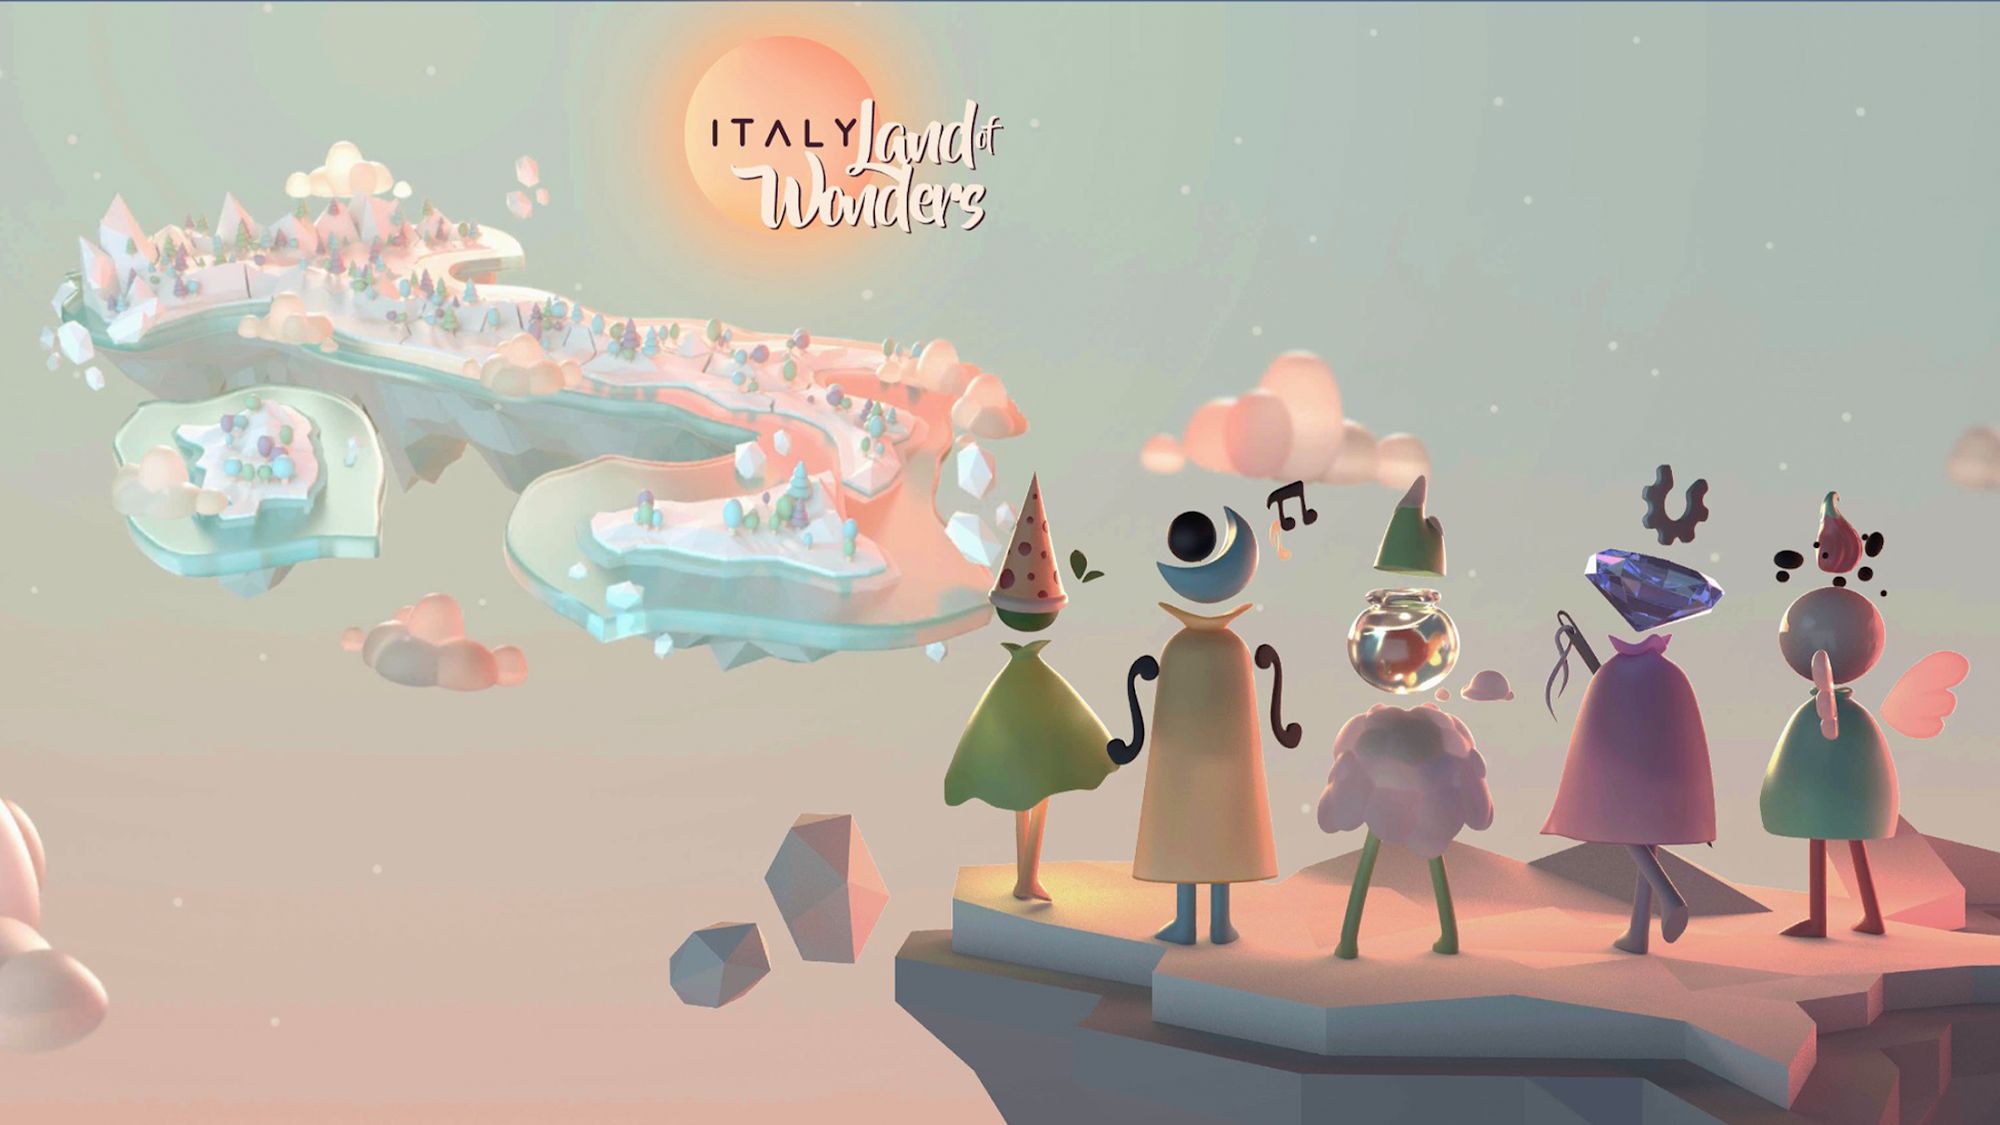 Scarica ITALY. Land of Wonders gratis per Android.